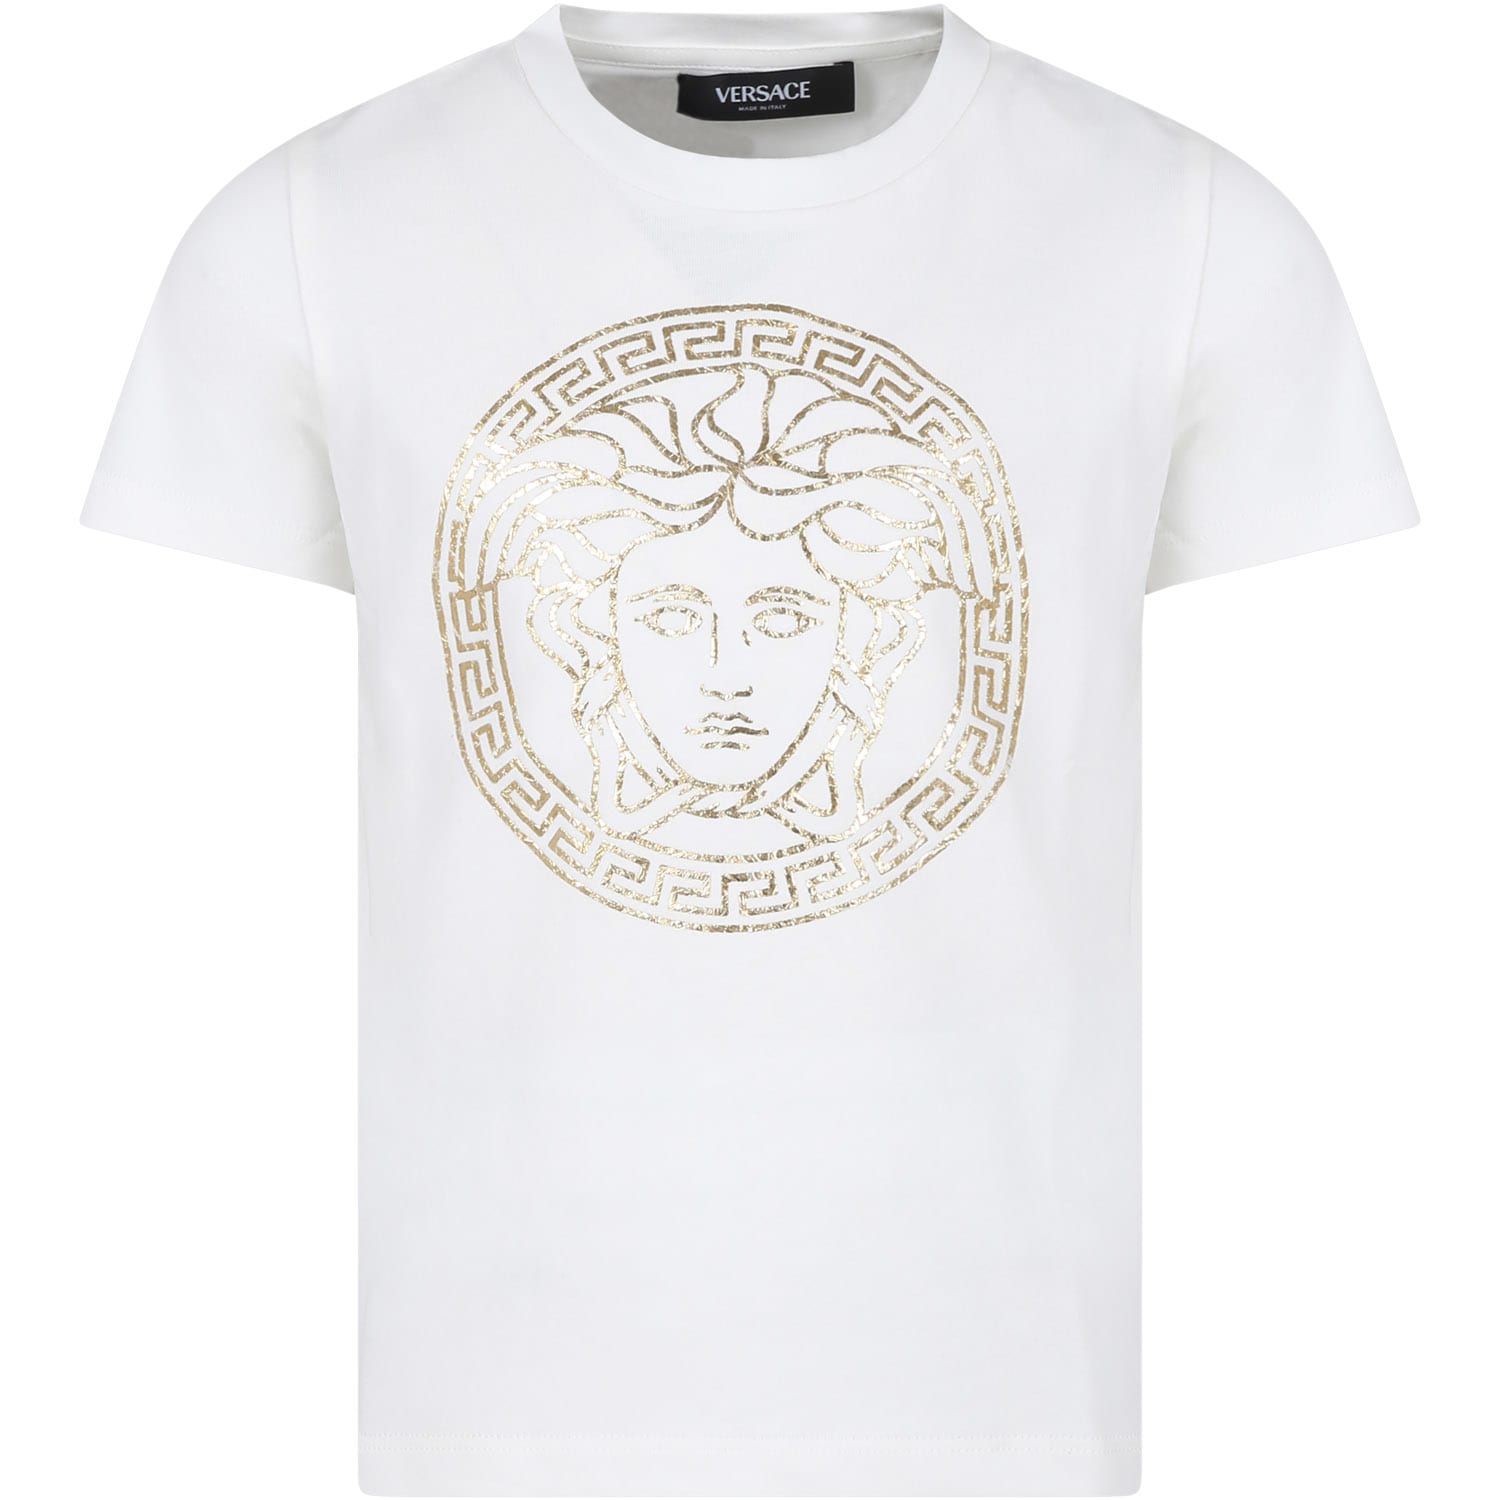 Versace White T-shirt For Kids With Medusa